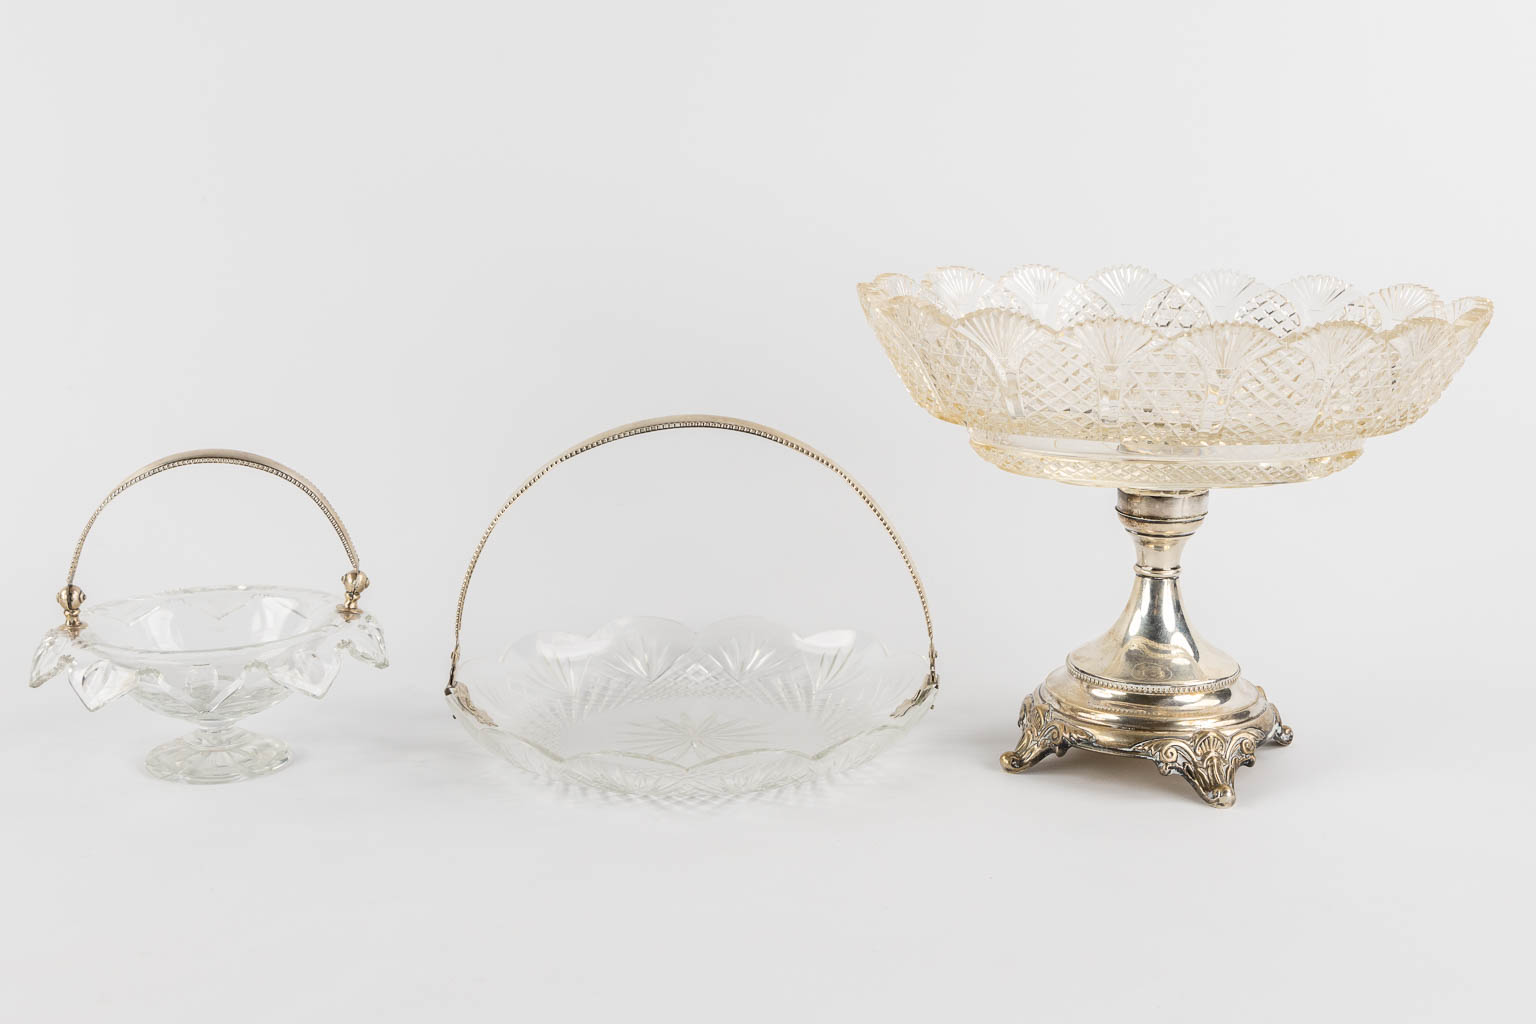 A large collection of silver and glass items, picture frames, serving ware and table accessories. 19th and 20th C. (H:28,5 cm)